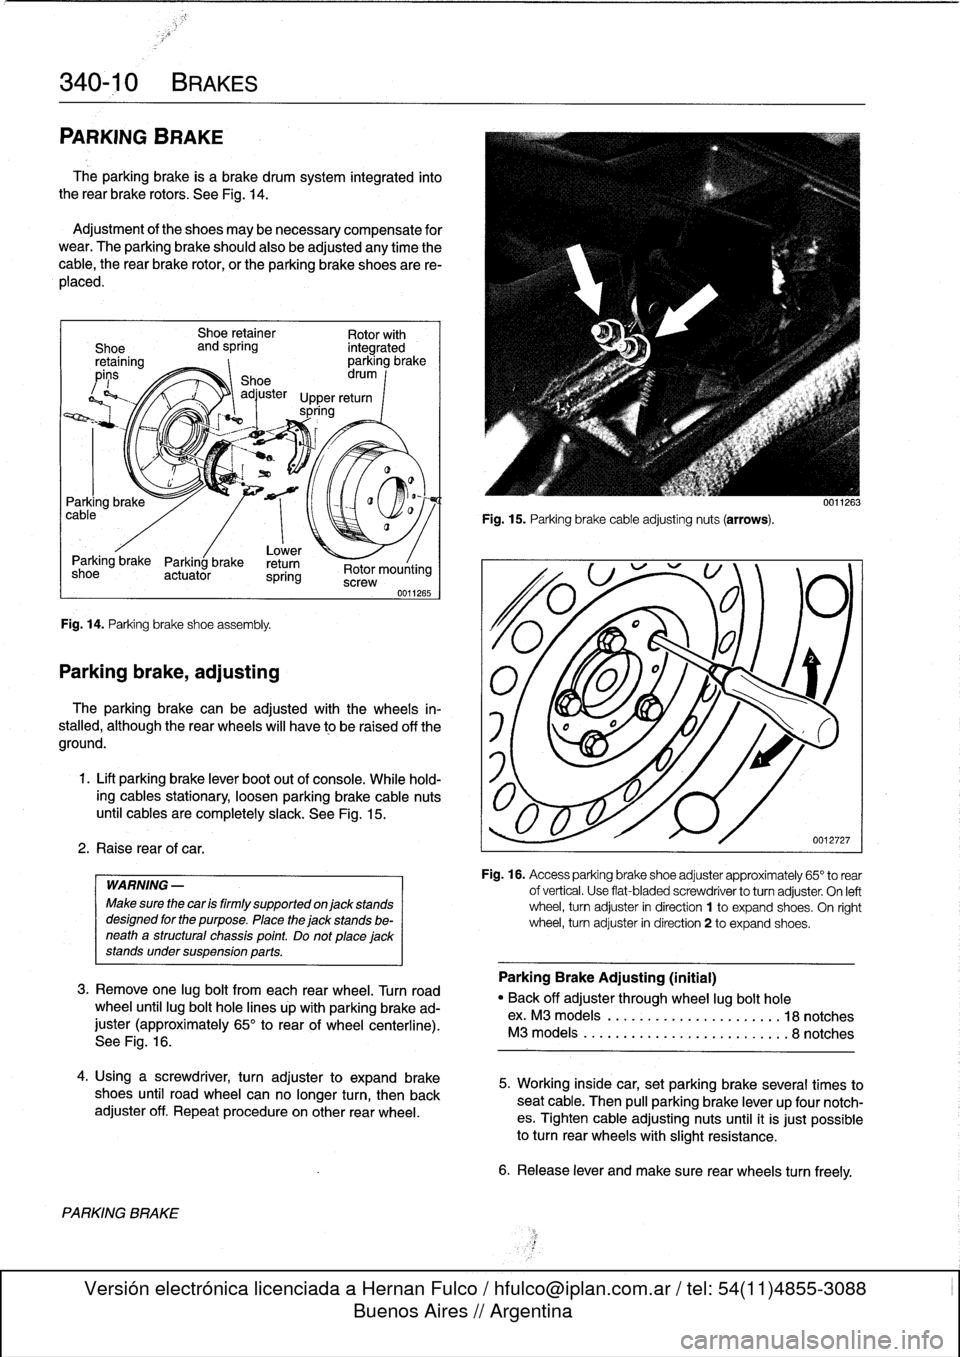 BMW 325i 1992 E36 Owners Manual 
340-
1
0
BRAKES

PARKING
BRAKE

The
parking
brake
is
a
brake
drum
system
integrated
into
the
rear
brake
rotors
.
See
Fig
.
14
.

Adjustment
of
the
shoes
may
benecessary
compensate
for
wear
.
The
park